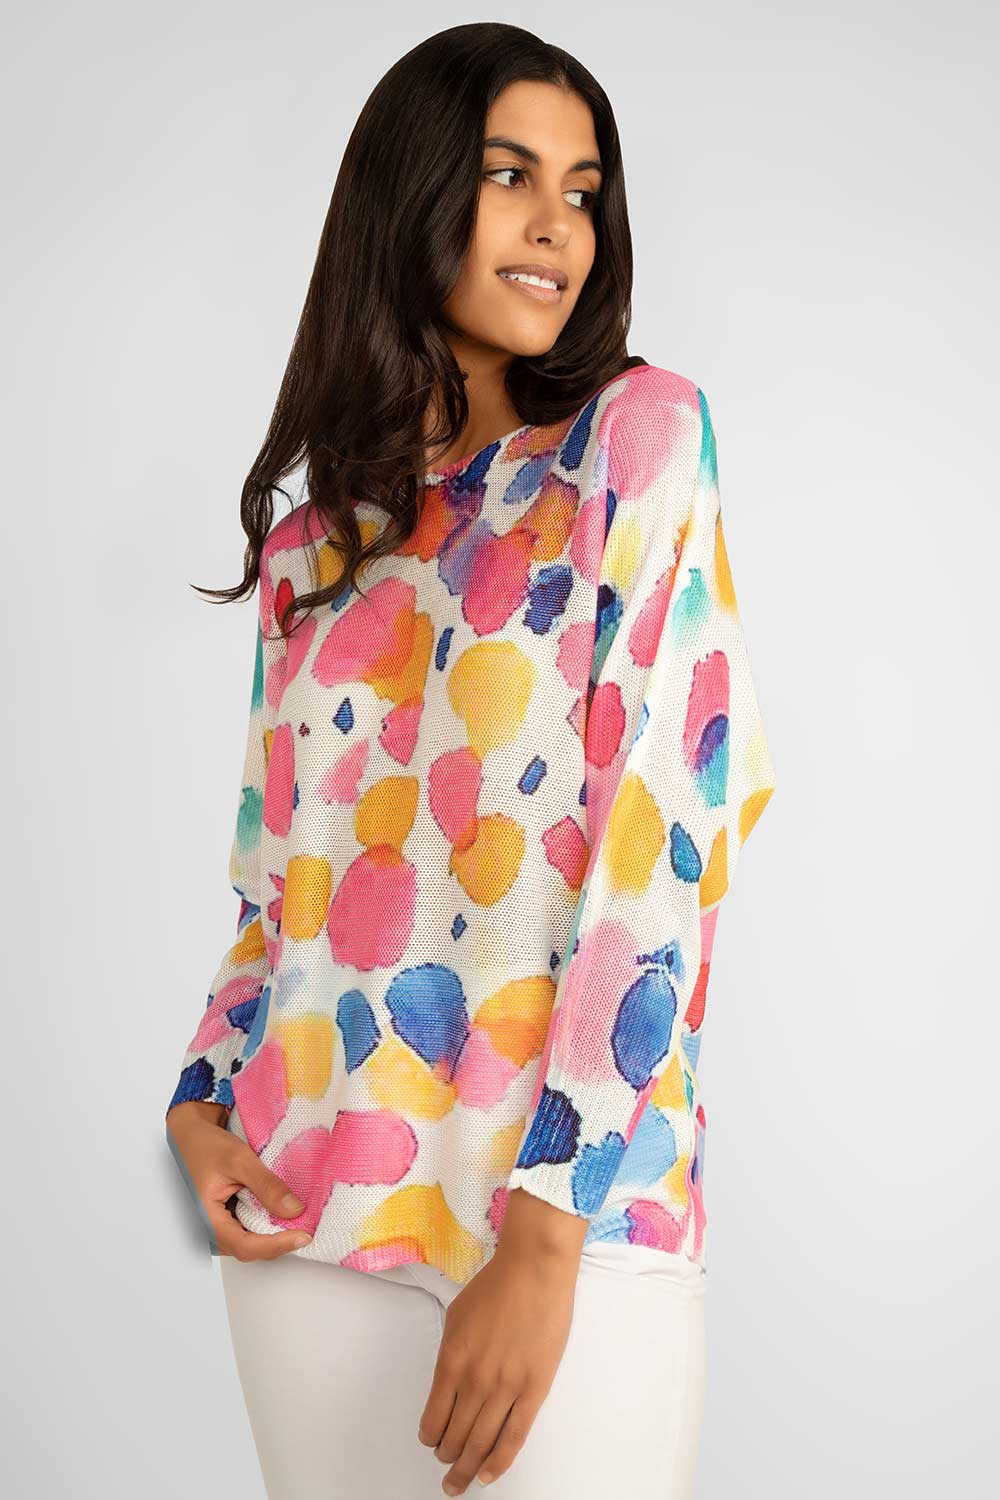 Front of Carre Noir (6802) Women's Long Sleeve Printed Dot Lightweight Pullover Sweater in a pink dot print accented by blues and yellows